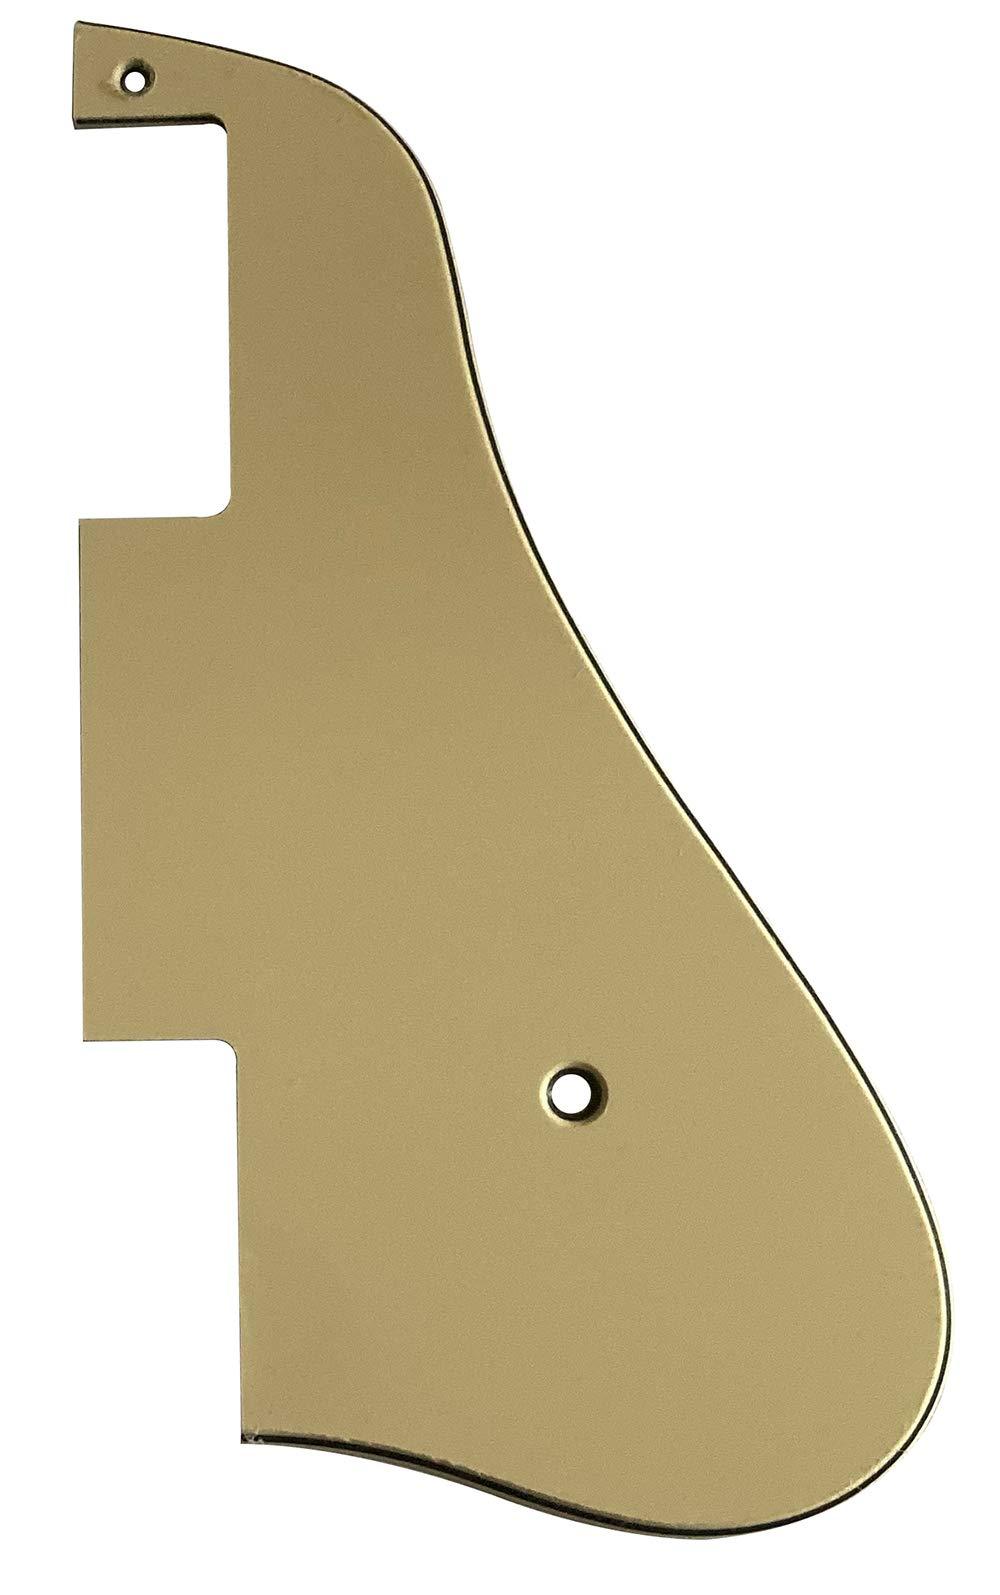 Custom Guitar Pickguard For Epiphone ES-339 Style (3 Ply Vintage Yellow)